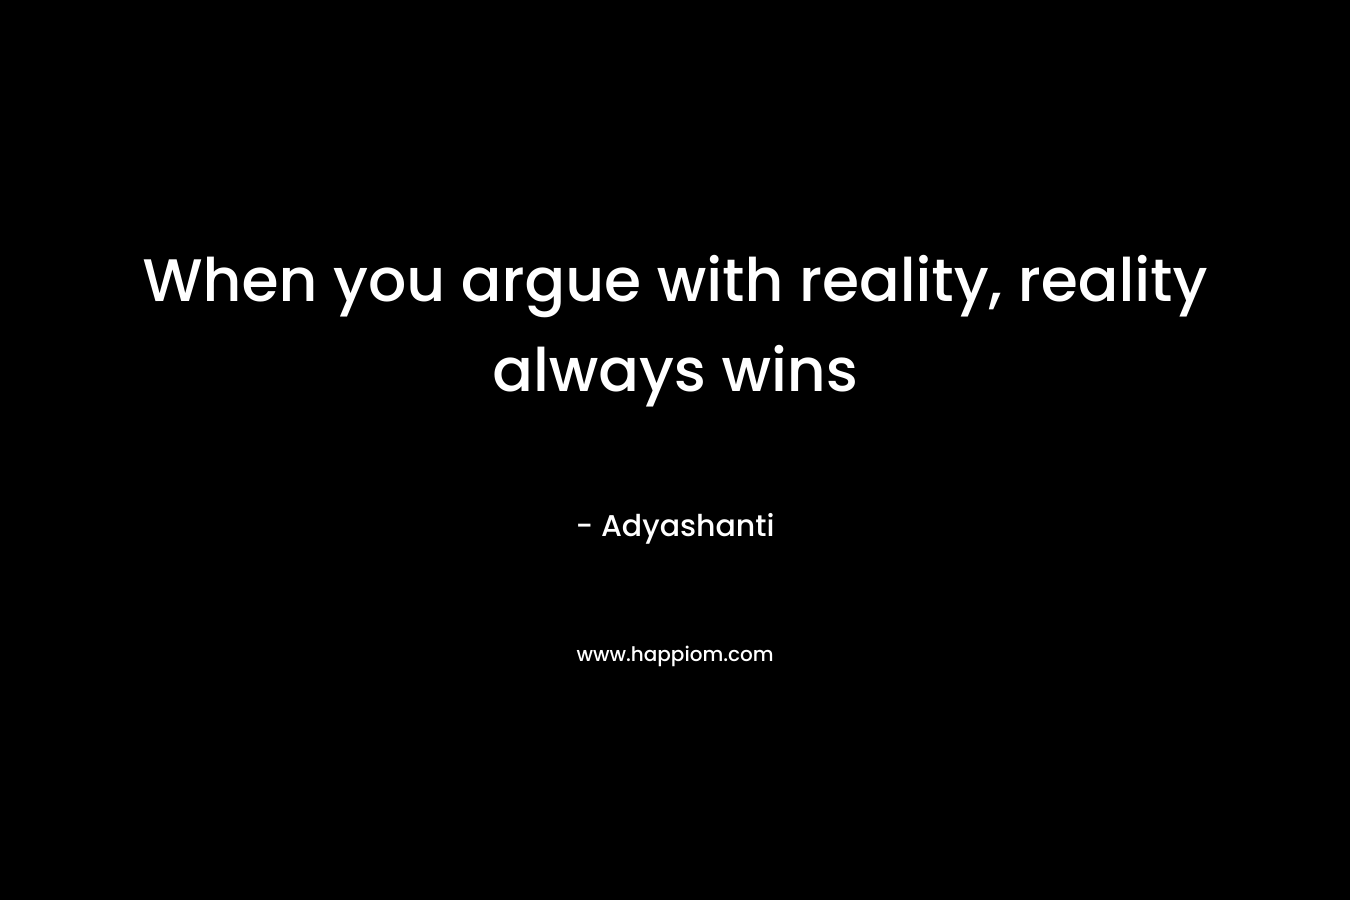 When you argue with reality, reality always wins